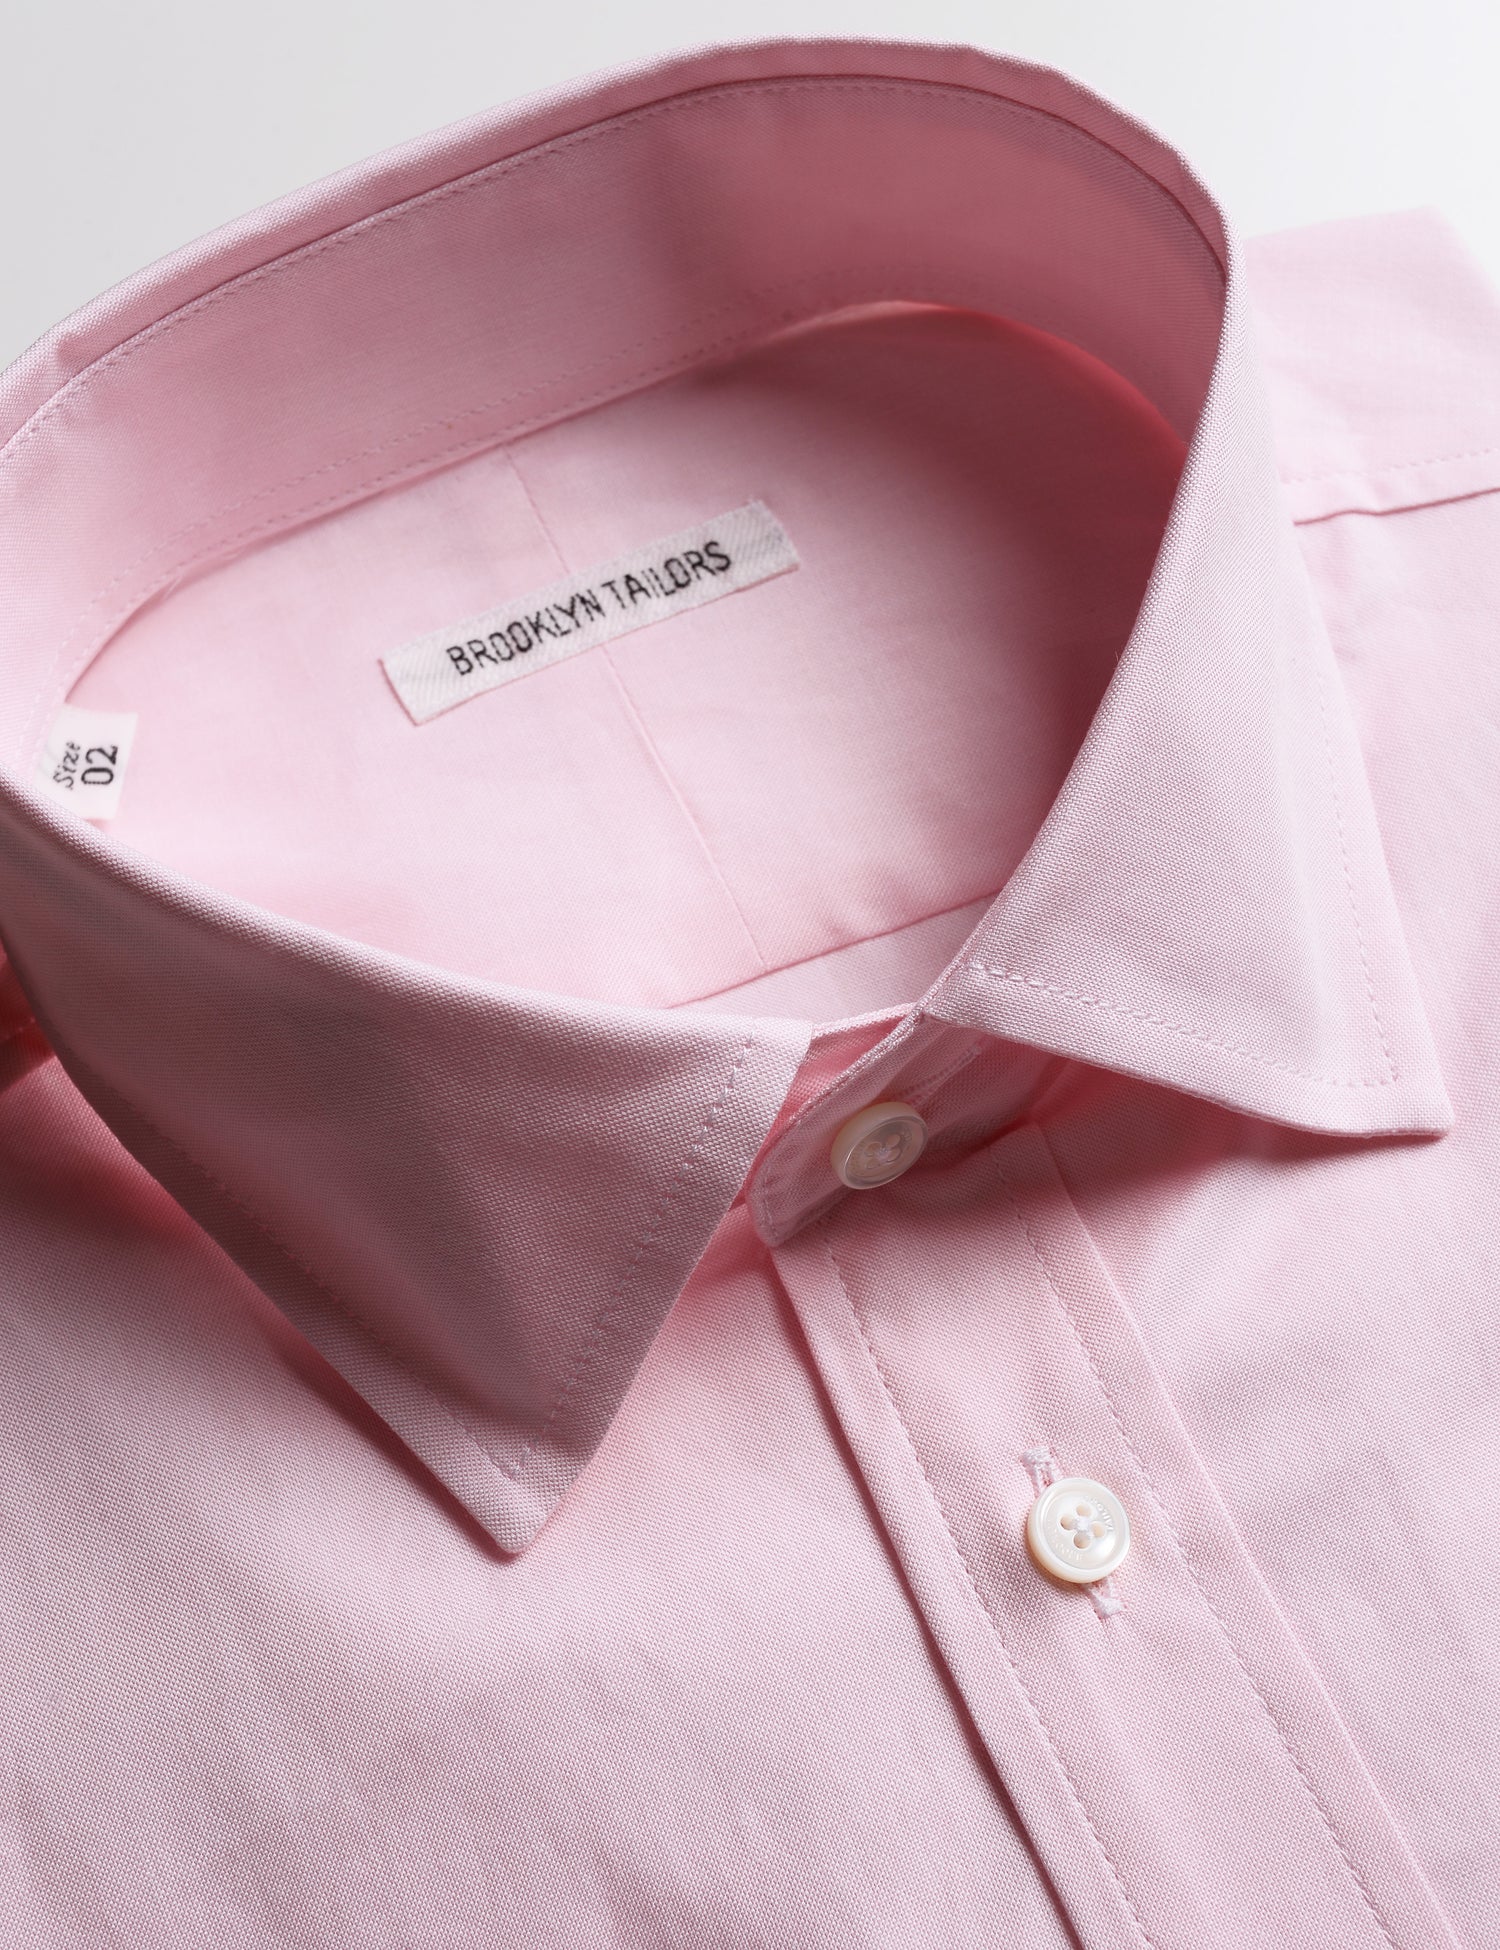 Detail shot of collar, labeling, buttons, and fabric texture on Brooklyn Tailors BKT20 Slim Dress Shirt in Pinpoint Oxford - Rose Quartz